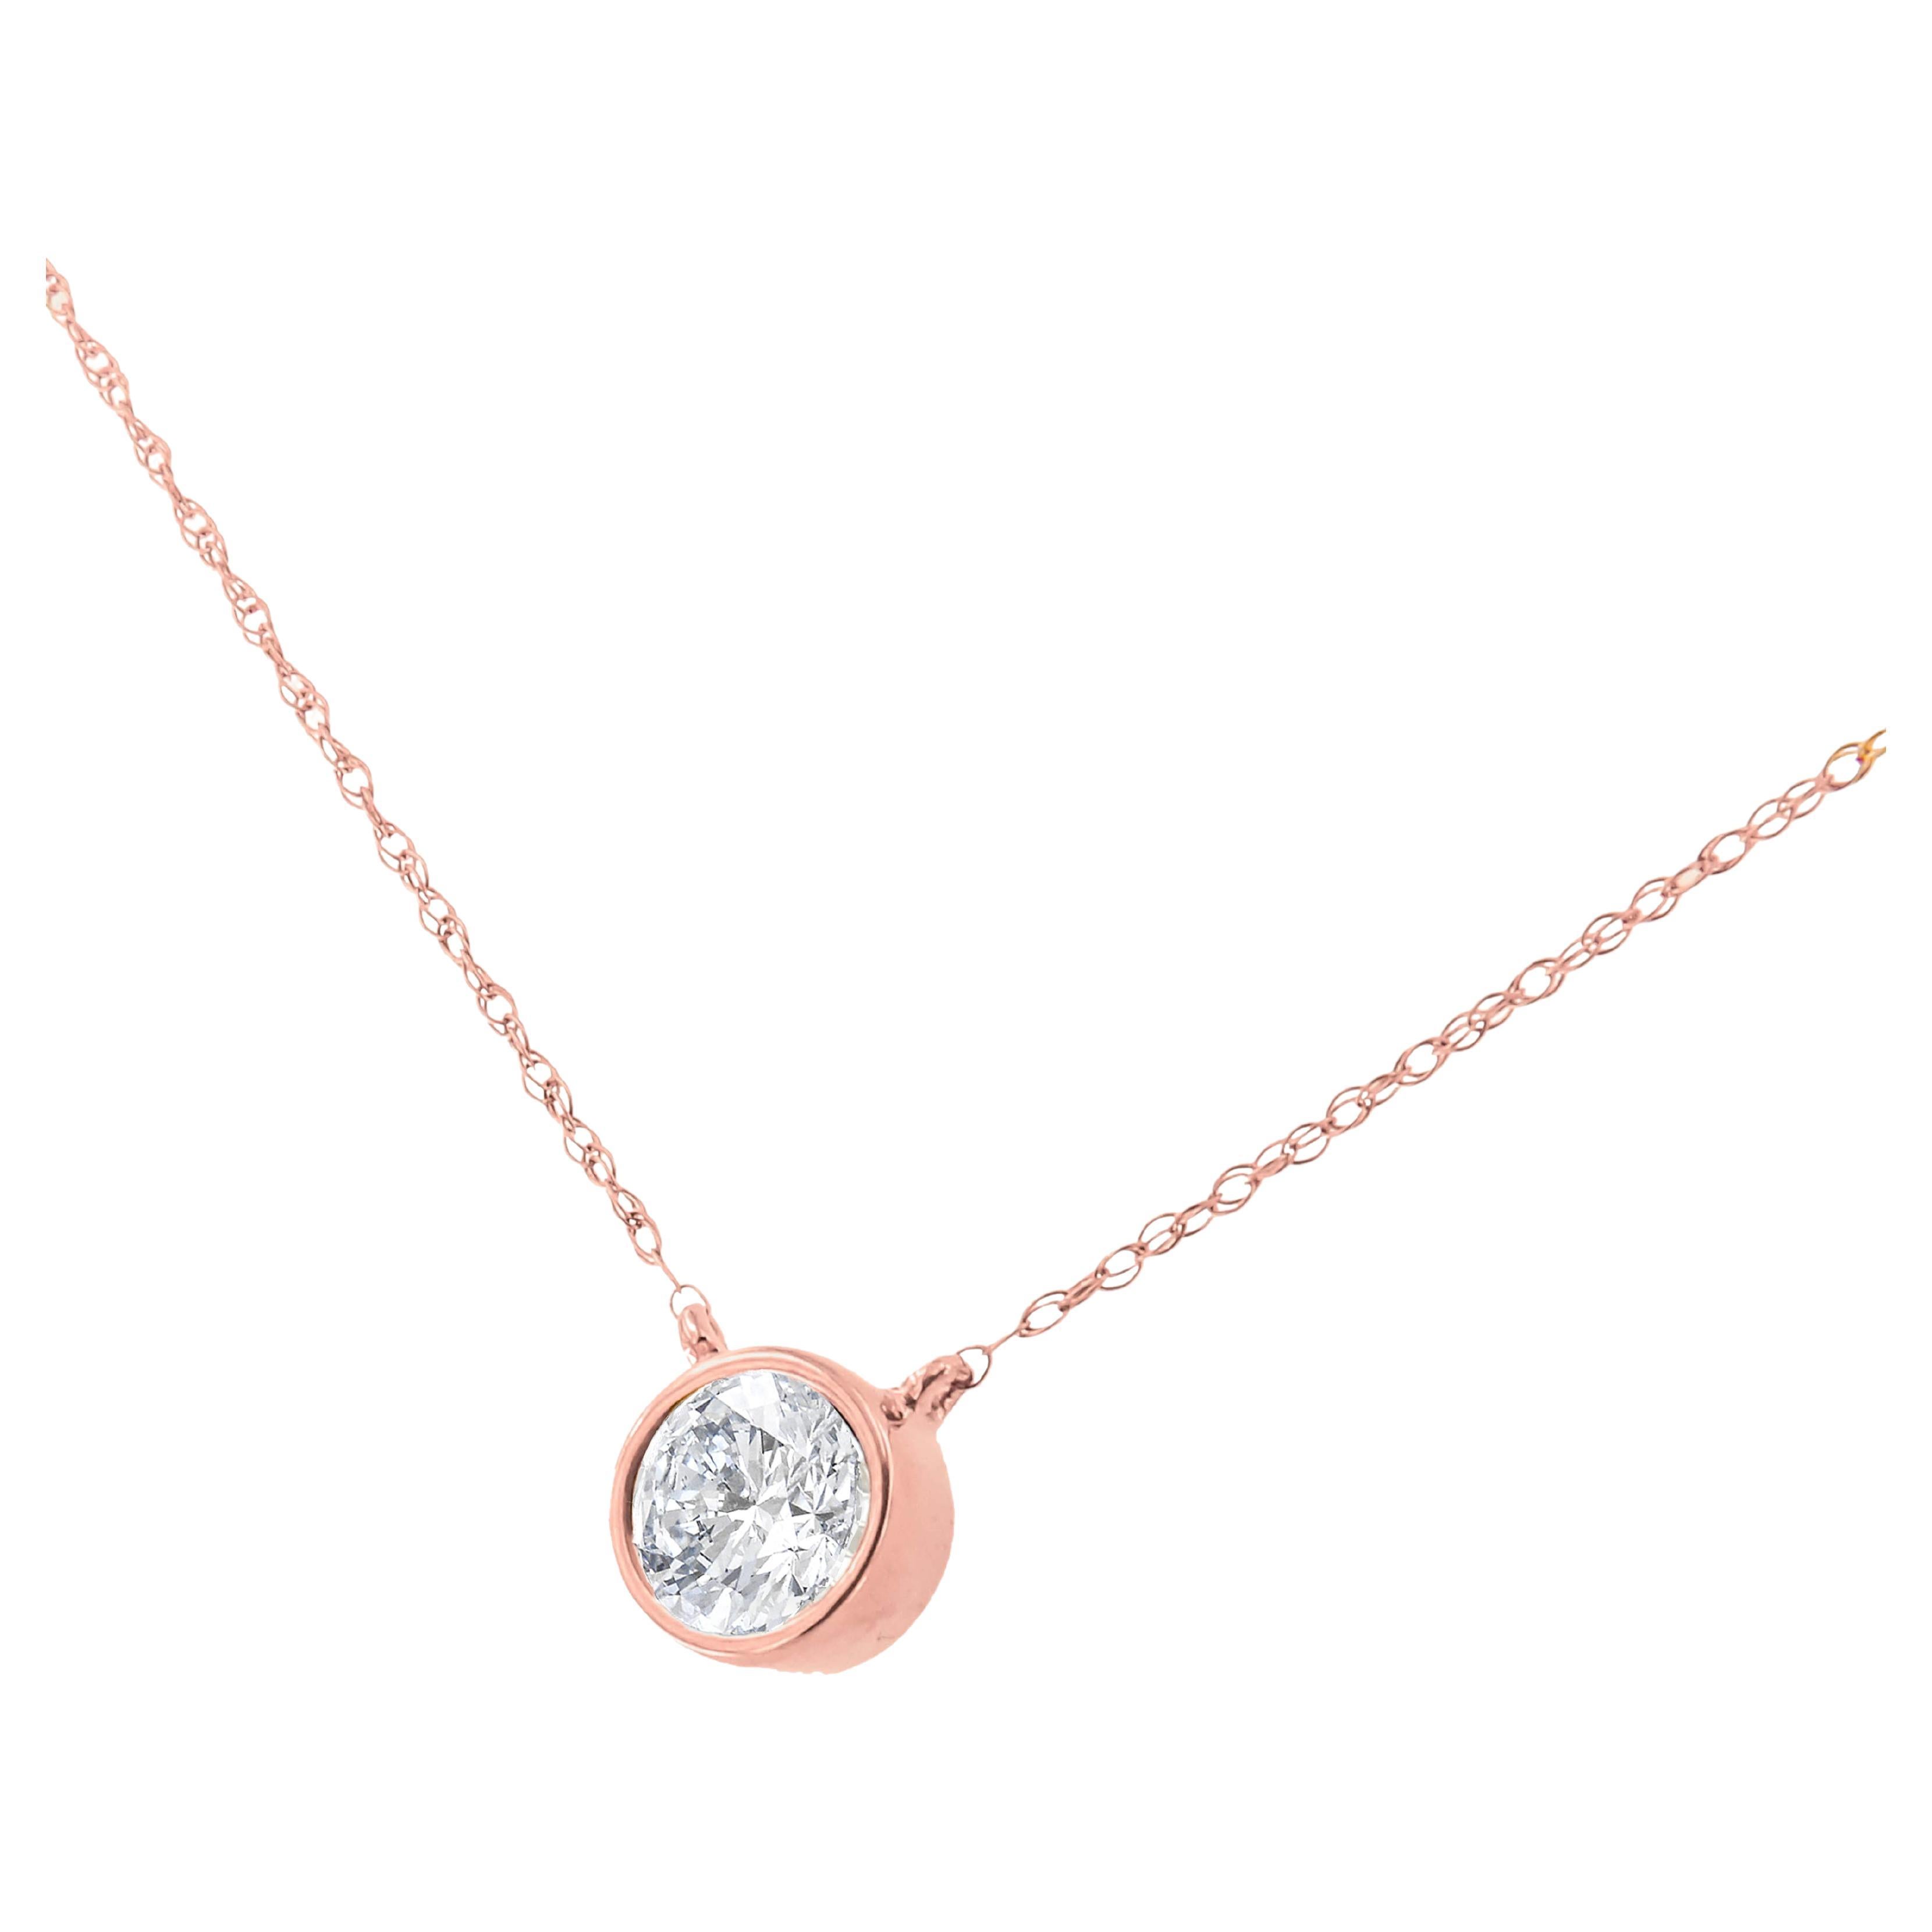 AGS Certified 10k Rose Gold 1/5 Carat Round Diamond Solitaire Pendant Necklace